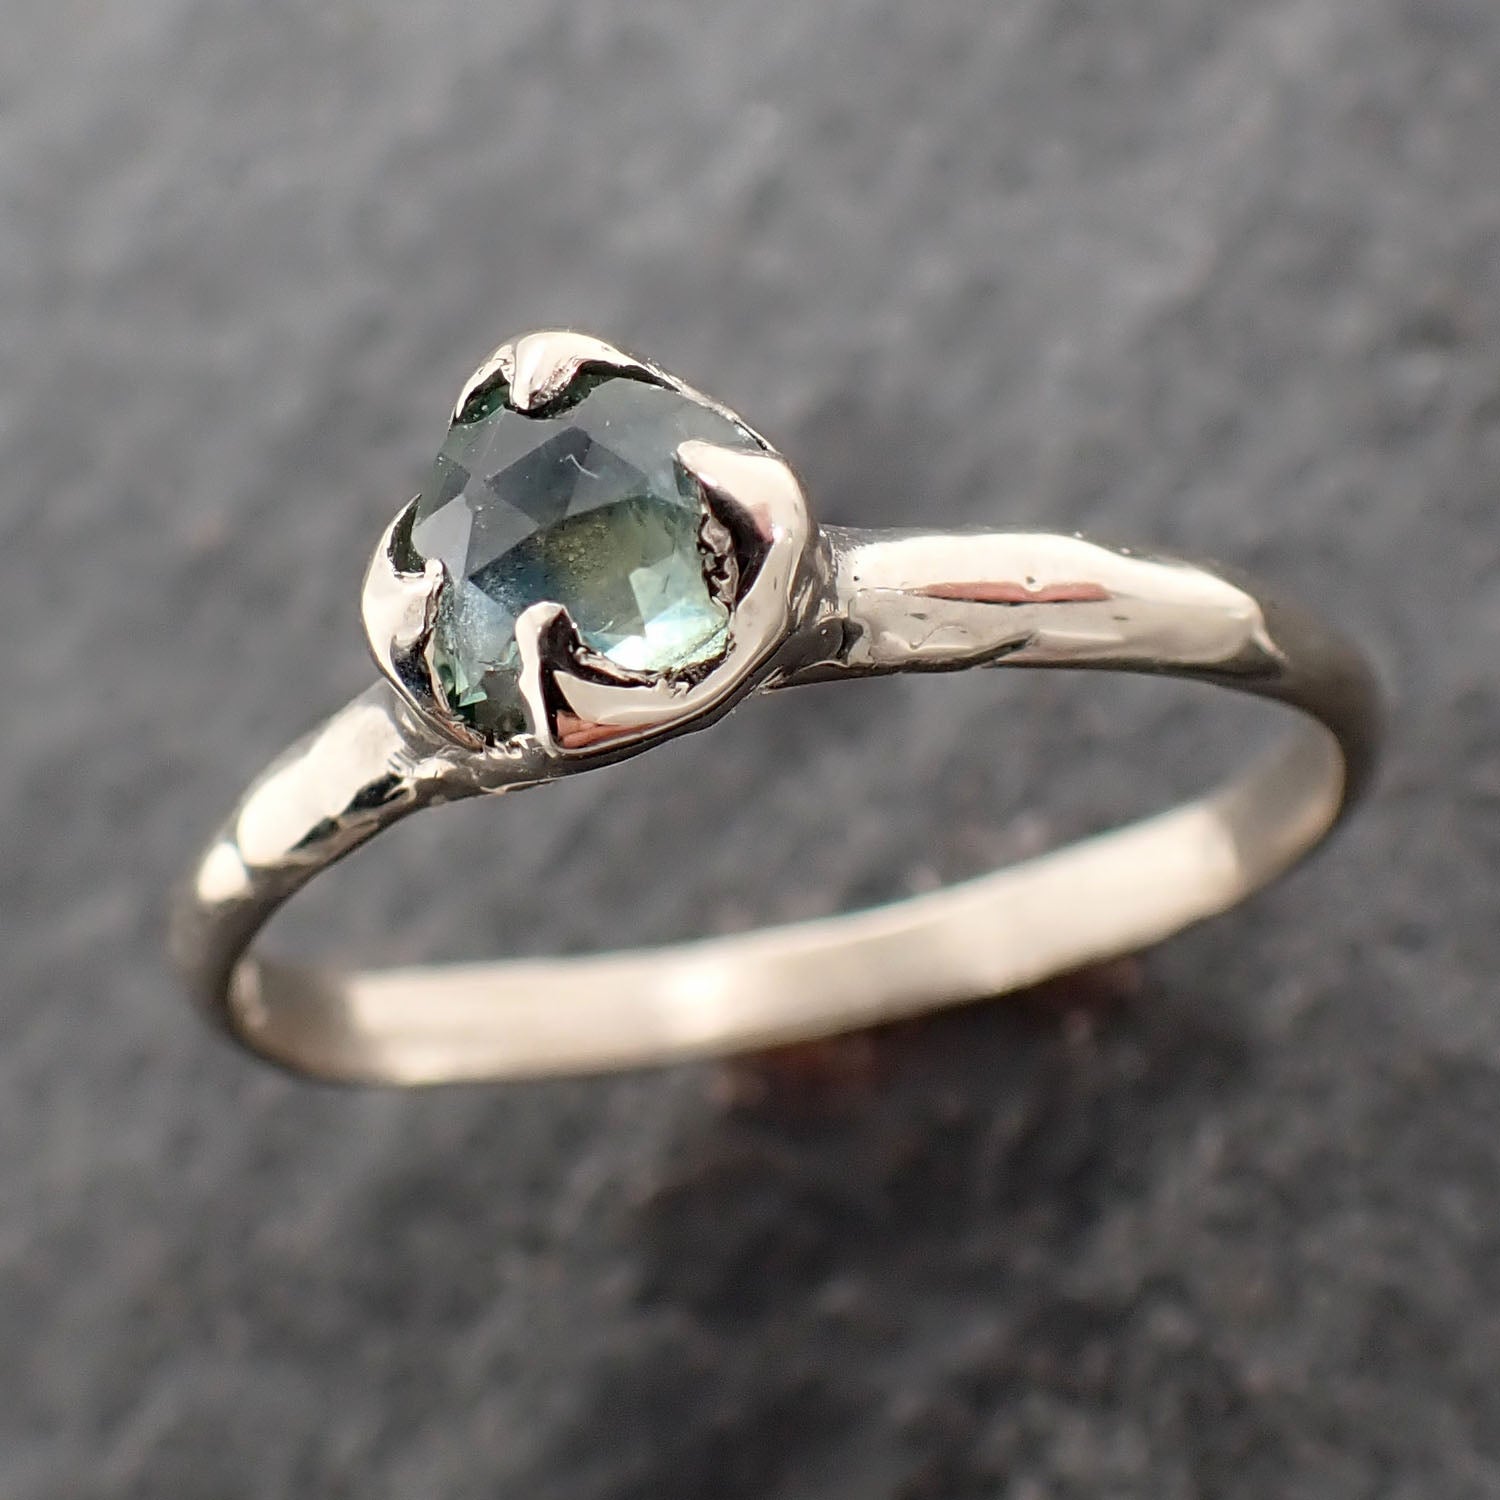 Fancy cut Montana green Sapphire 14k White gold Solitaire Ring Gold Gemstone Engagement Ring 2624